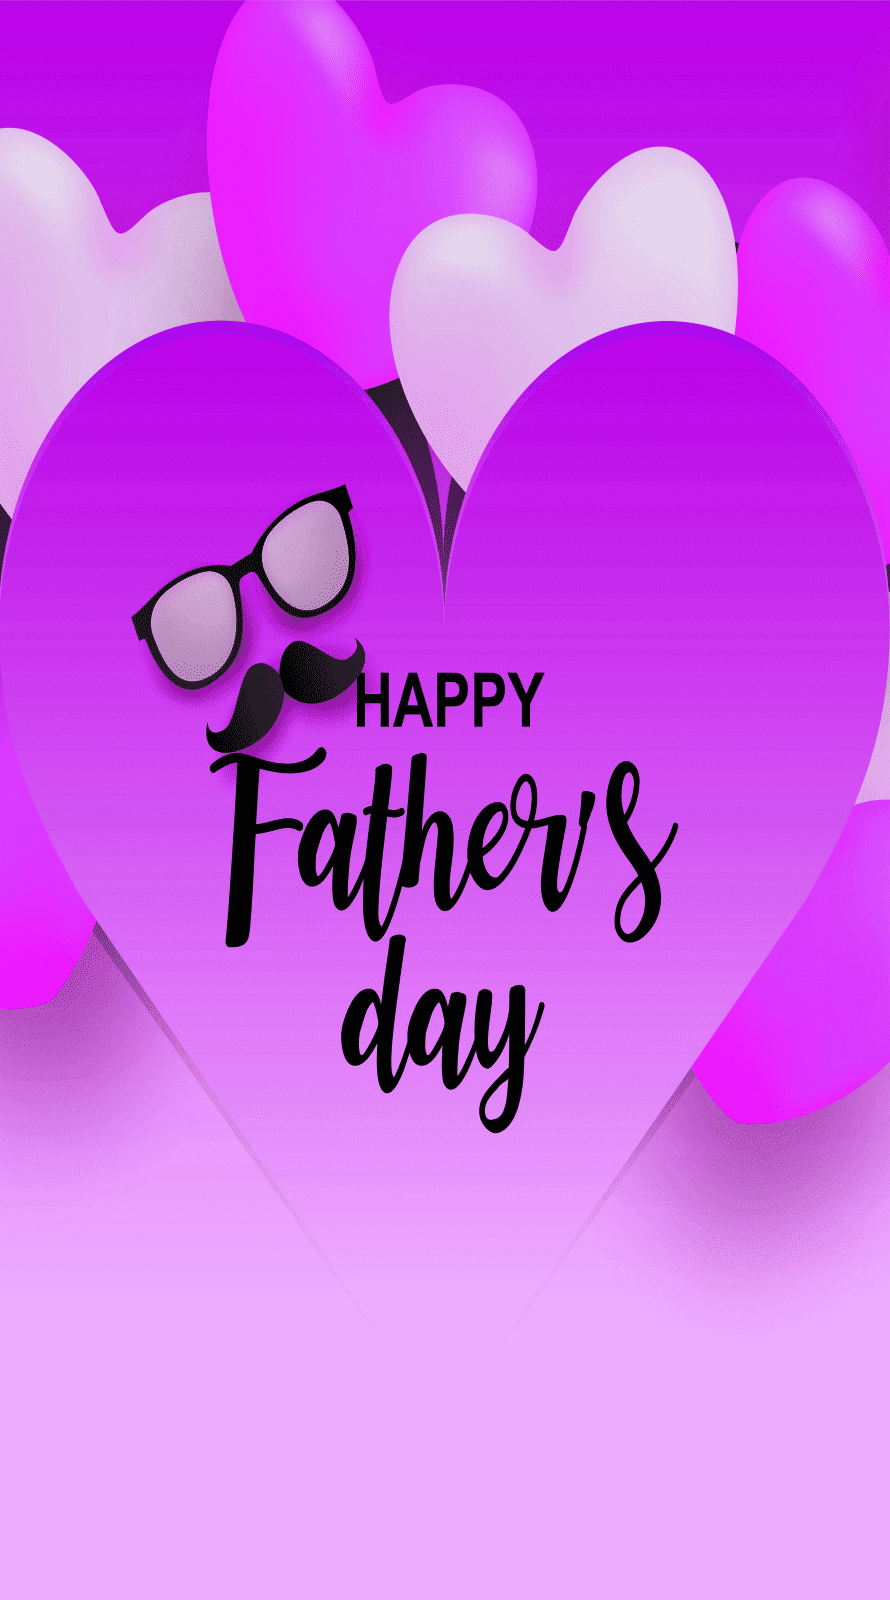 Super cute Happy fathers day wishes background dia del padre happy fathers day image 2022, Best iPhone Wallpaper and iPhone background, WallpaperUpdate, Best iPhone Wallpaper and iPhone background